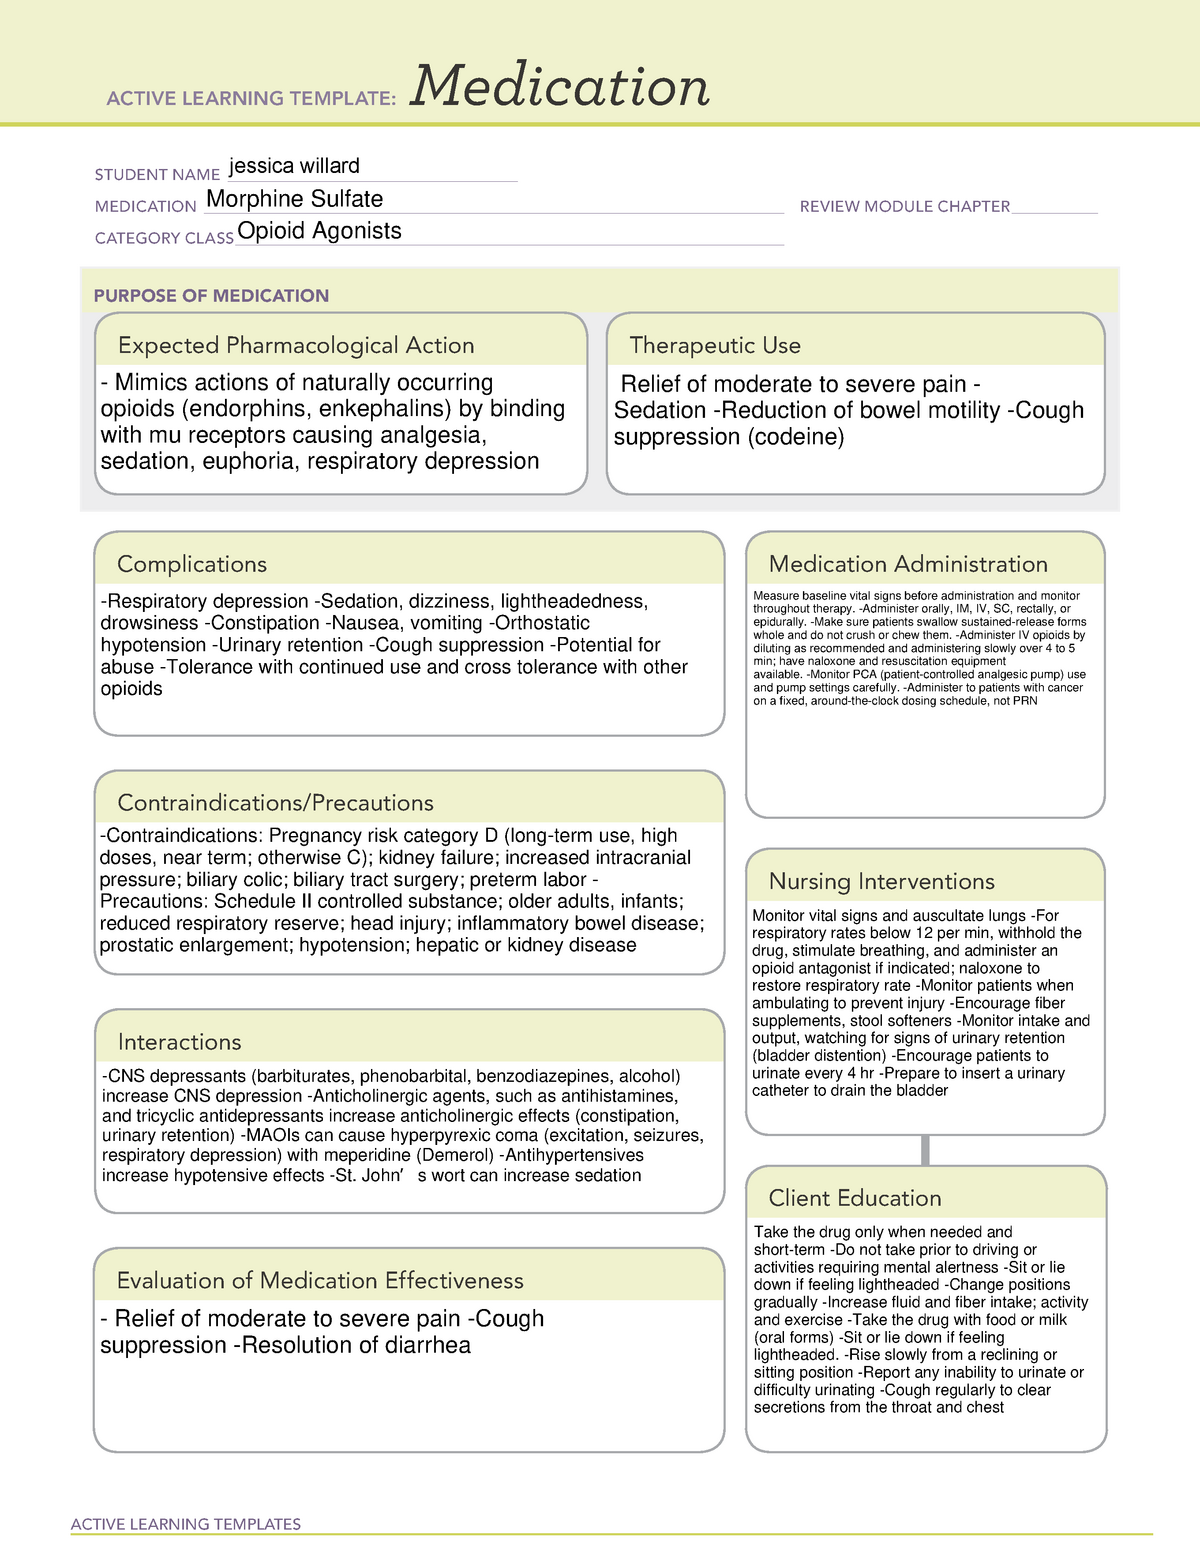 Morphine Sulfate Medication Template